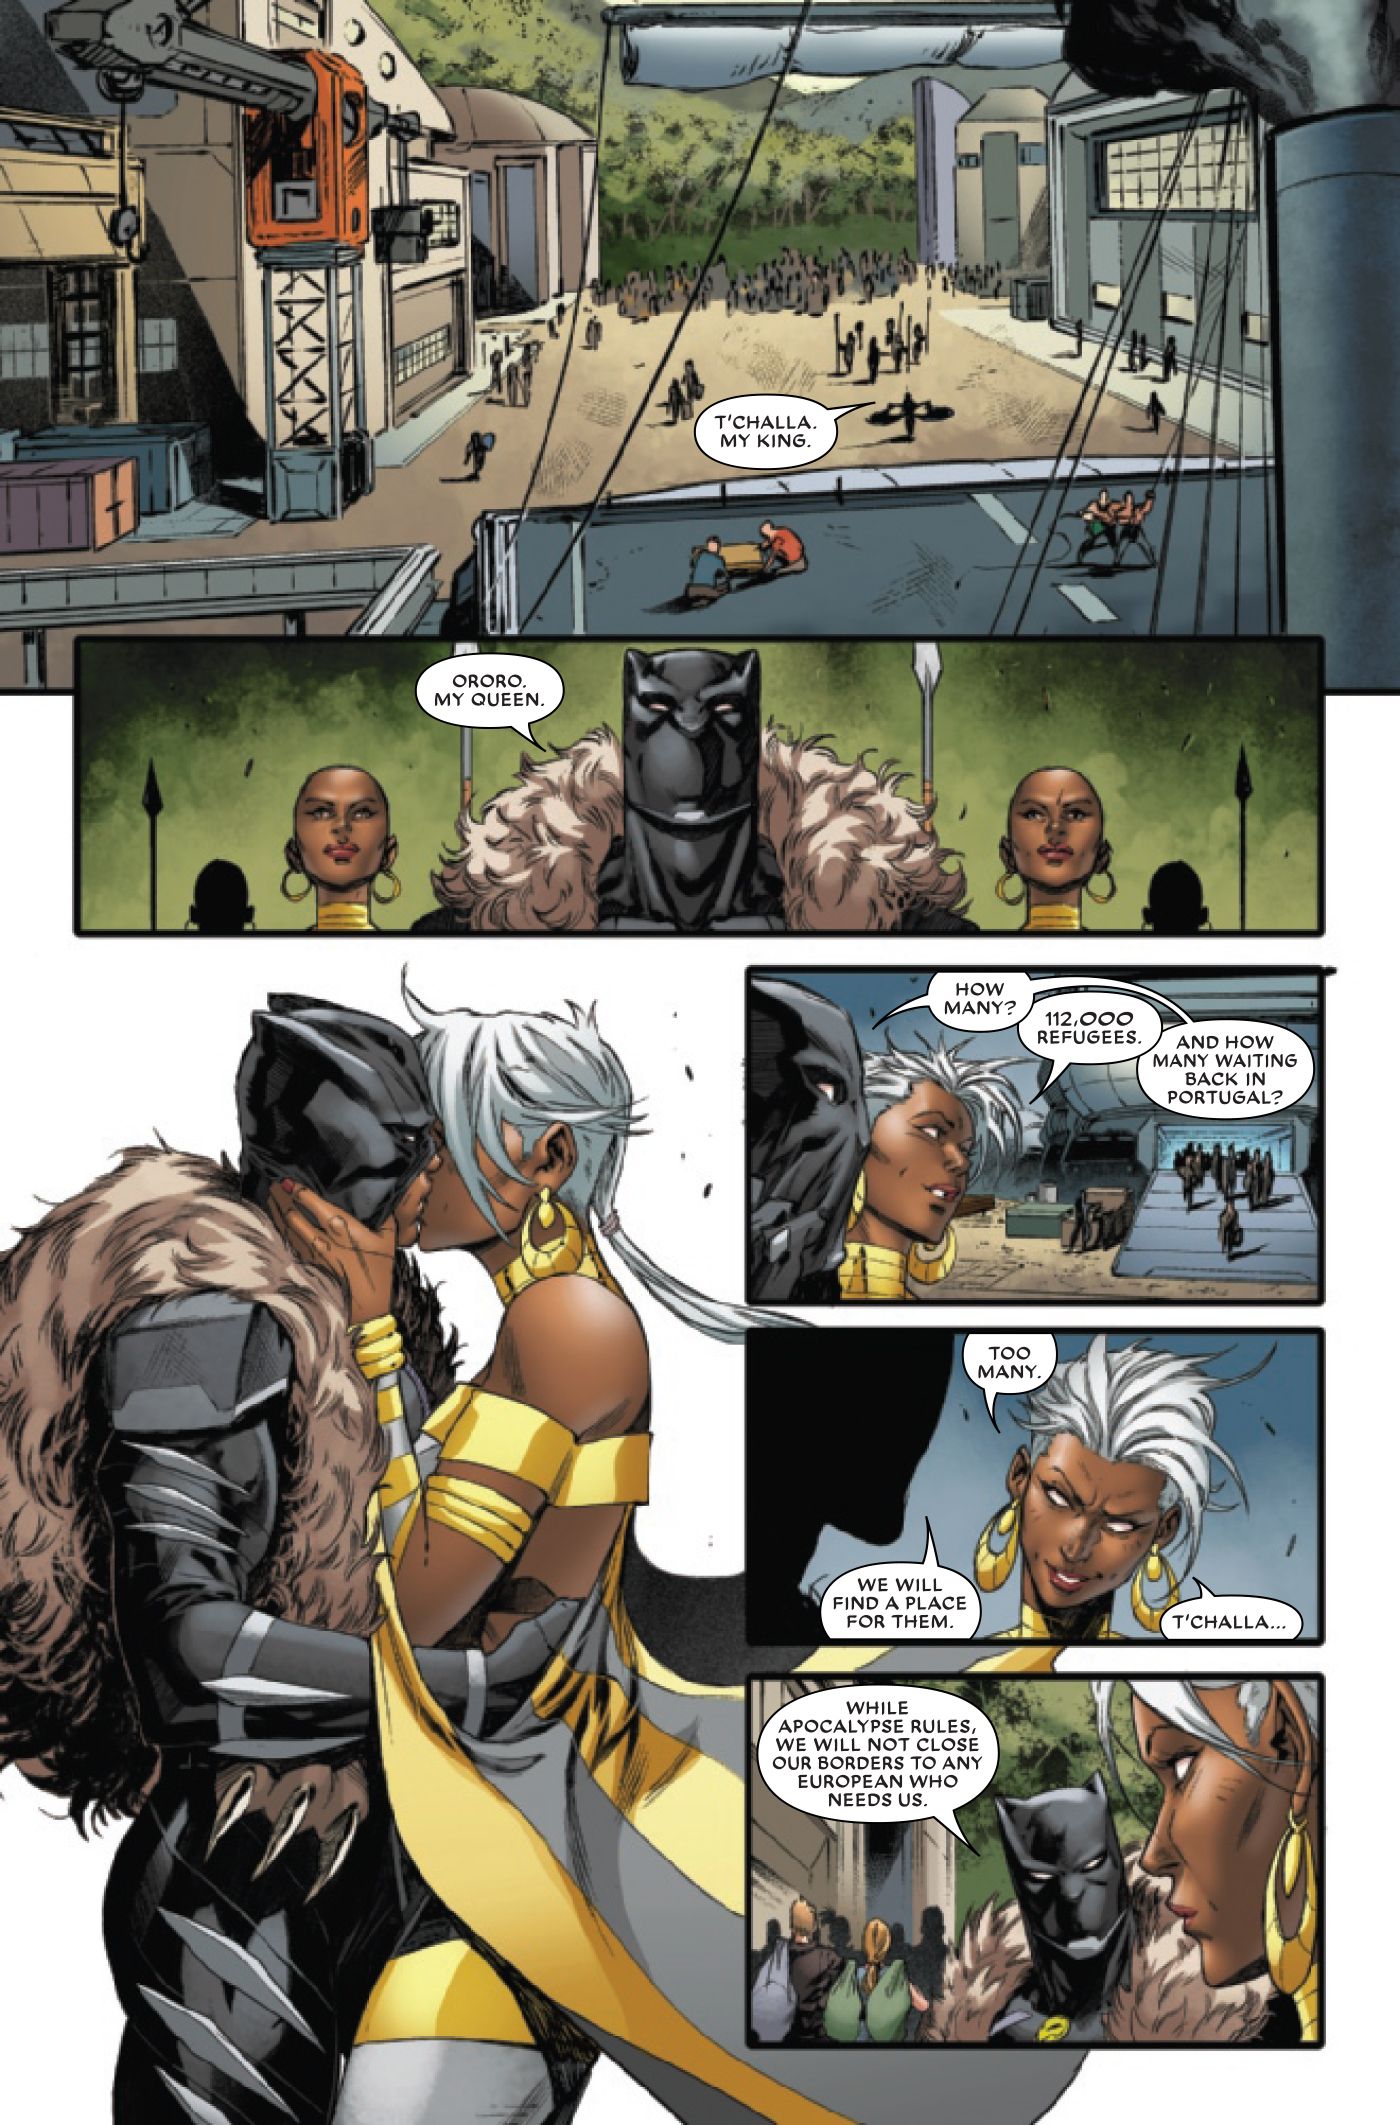 Storm is revealed to be married to Black Panther, with the two serving as king and queen of Wakanda.